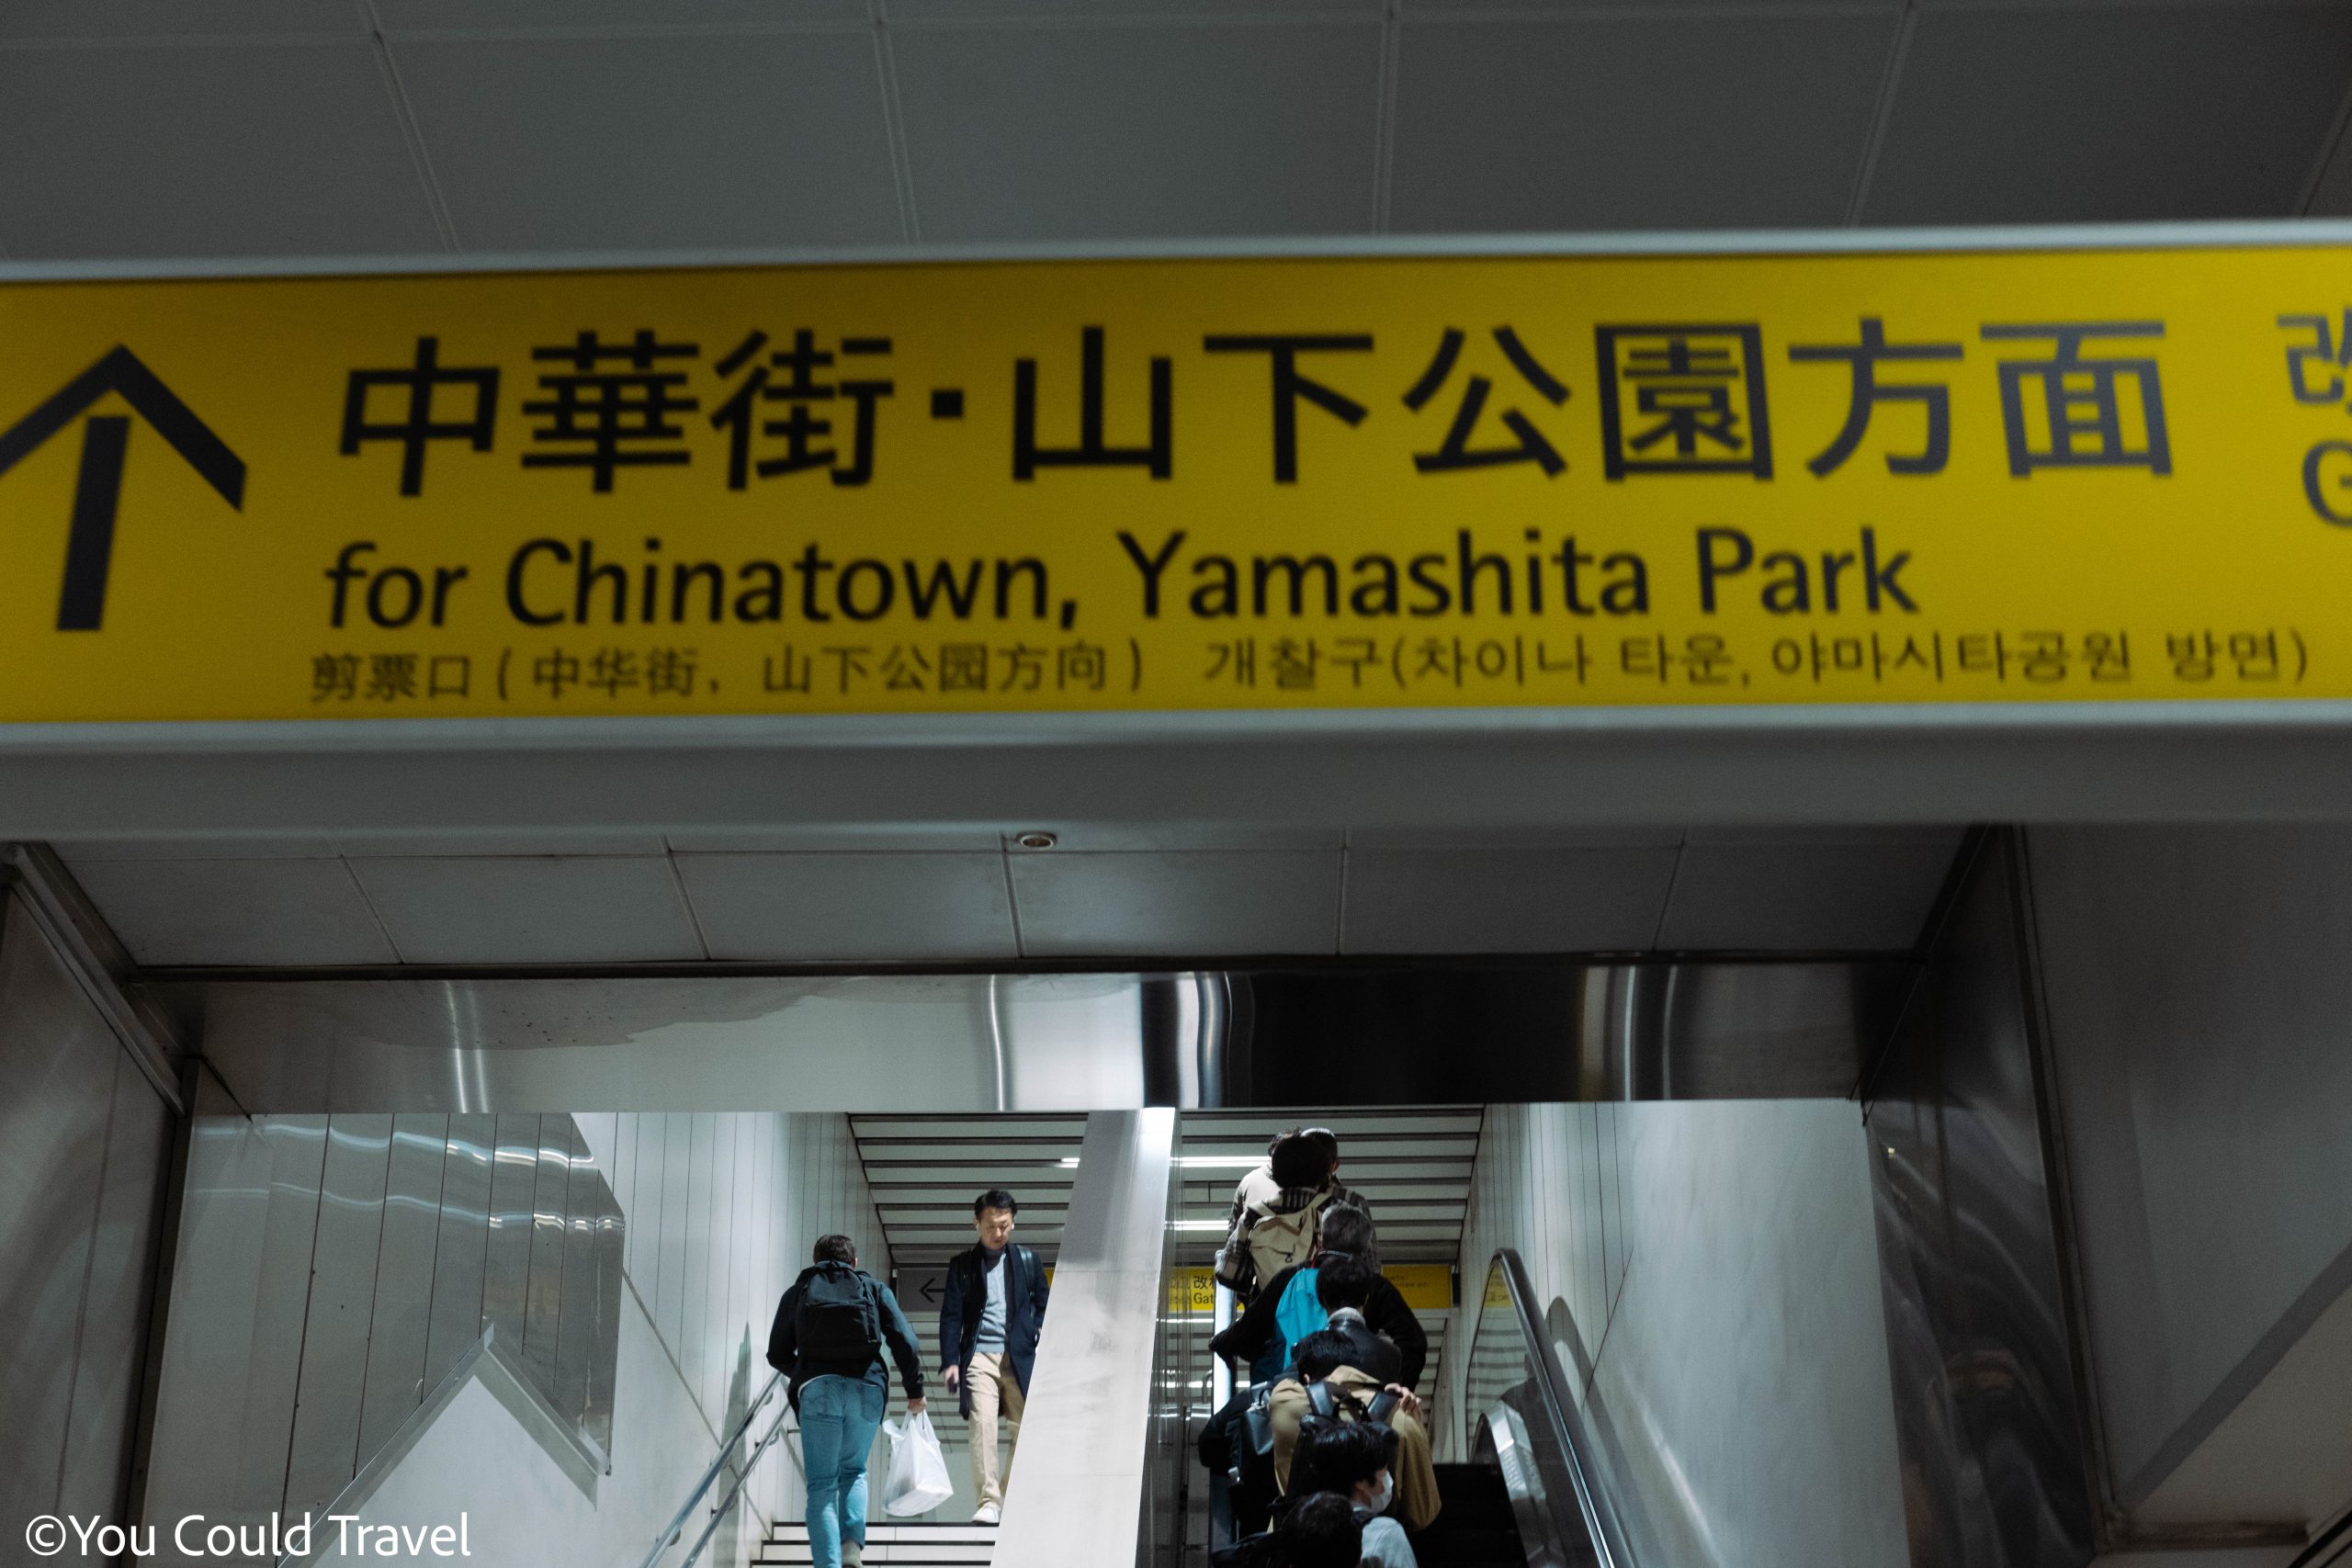 Yokohama signs for Chinatown from the trainstation